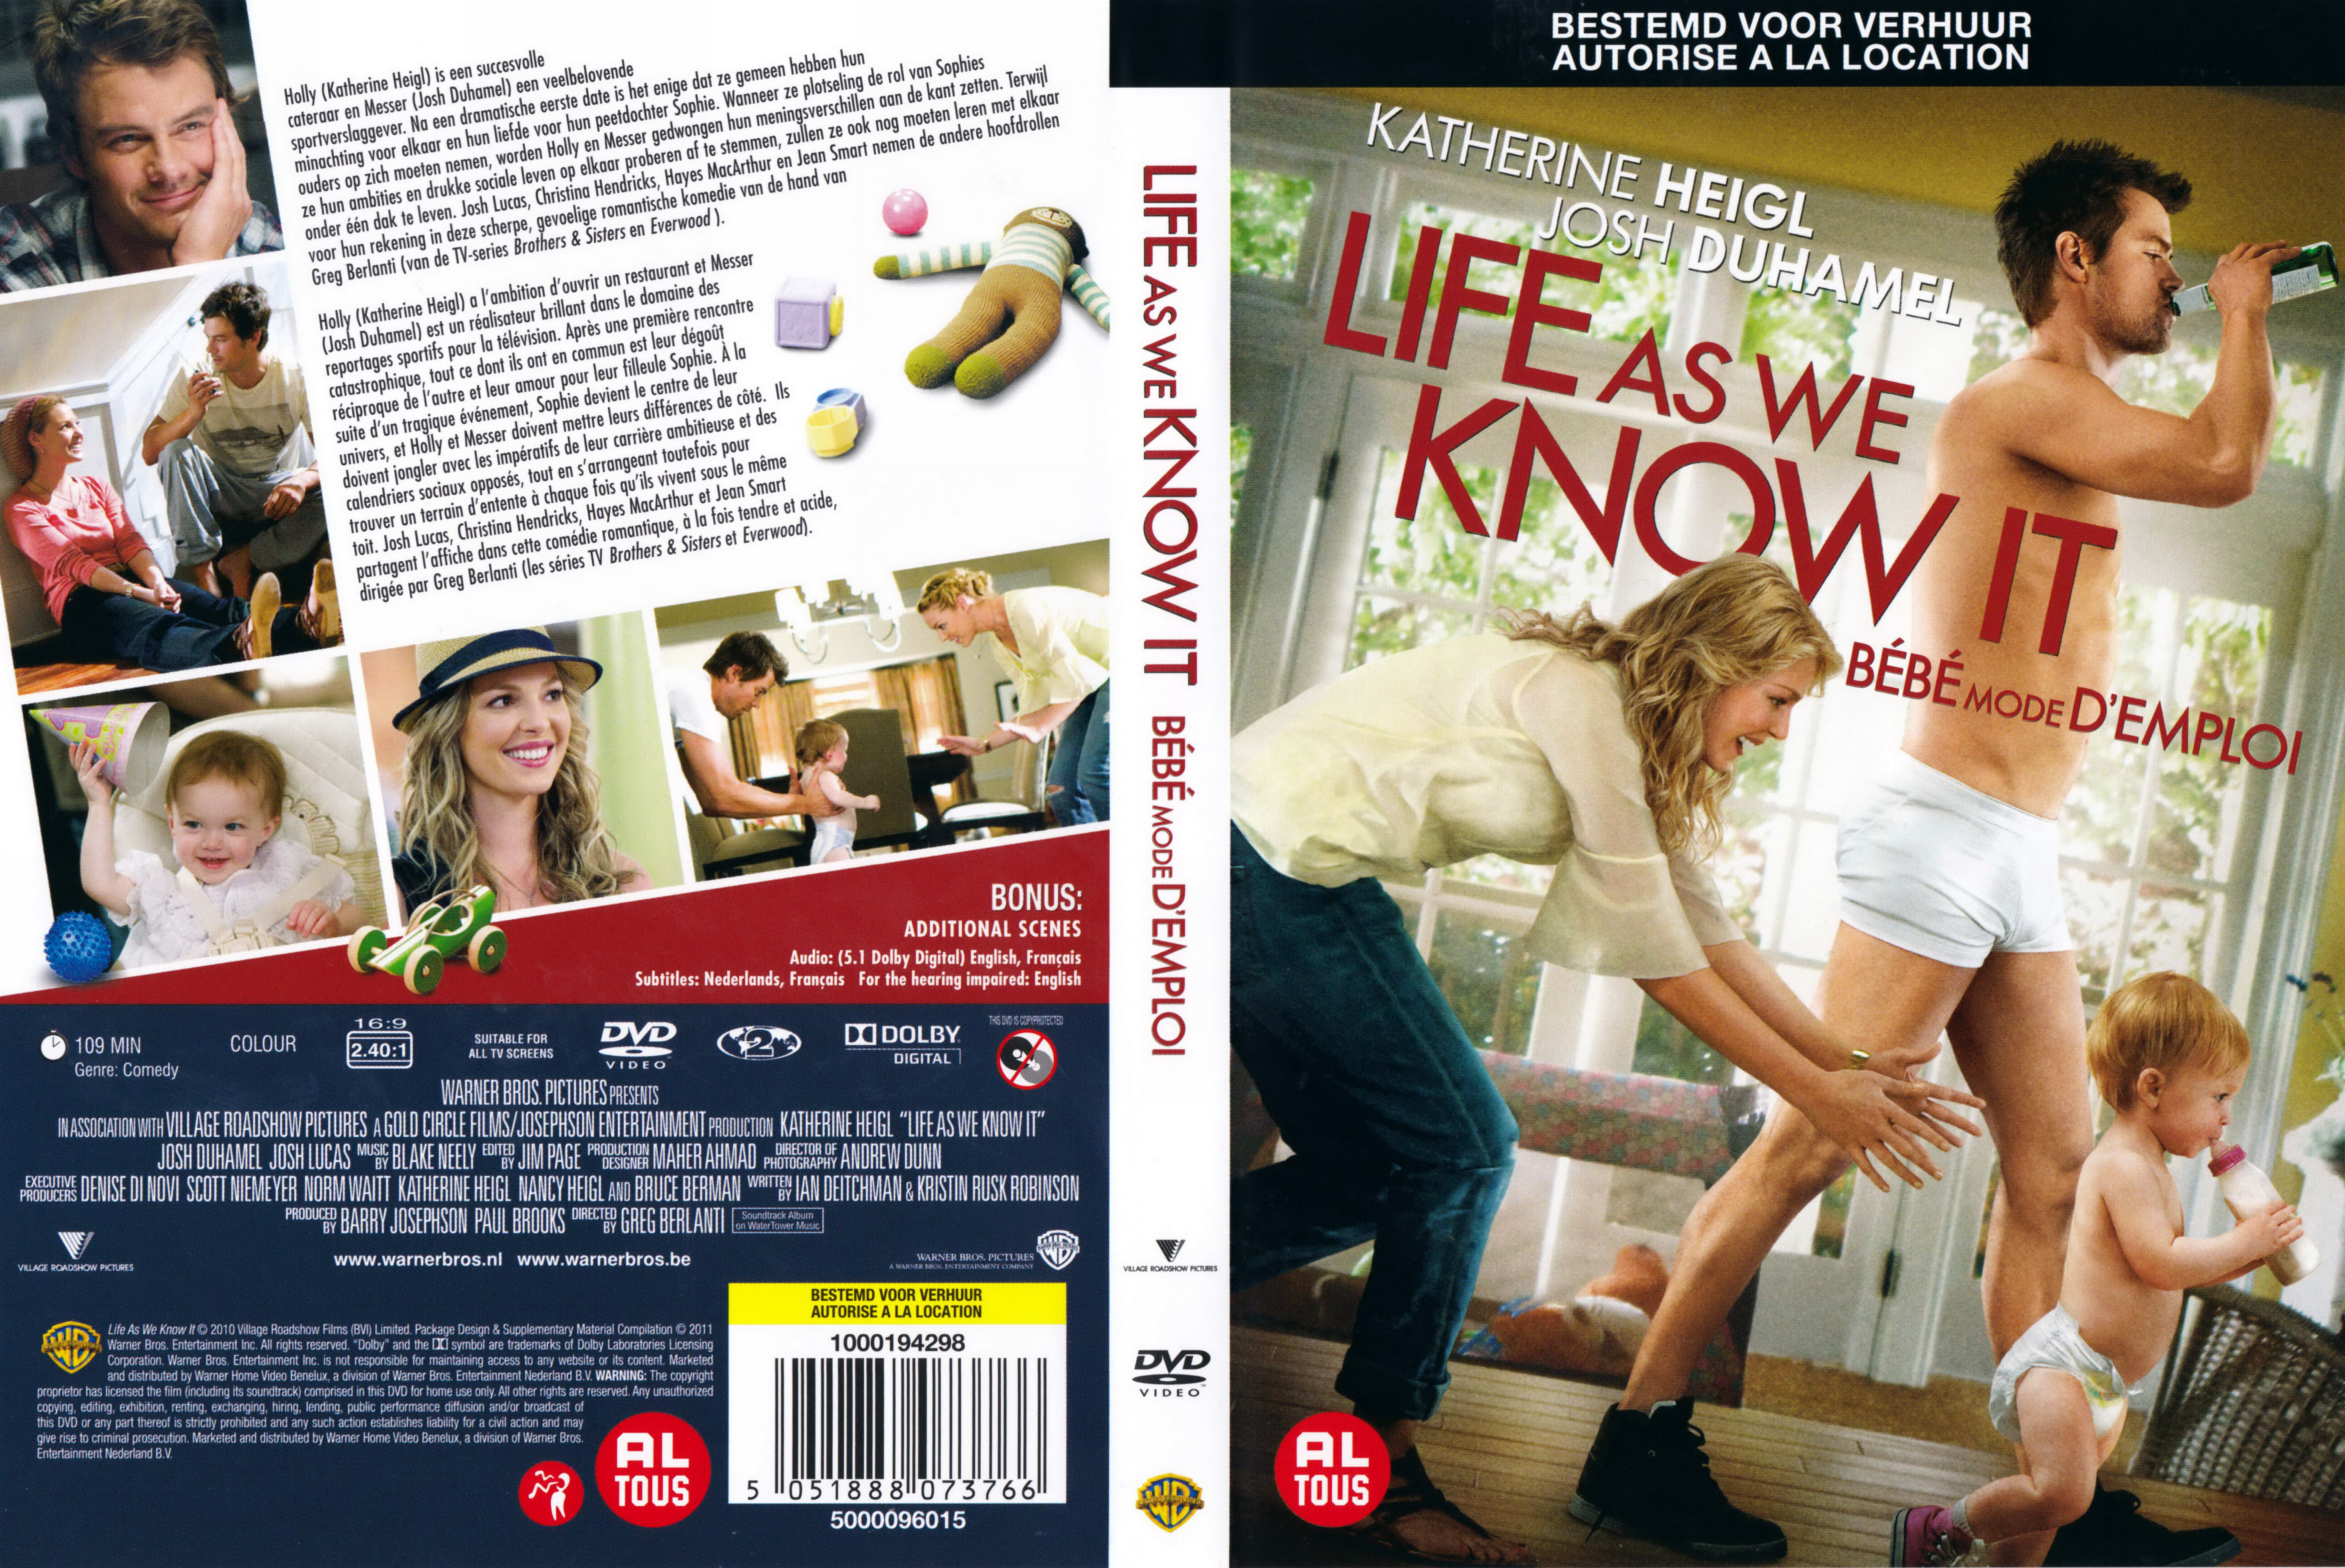 Jaquette DVD Life as we know it - Bb mode d